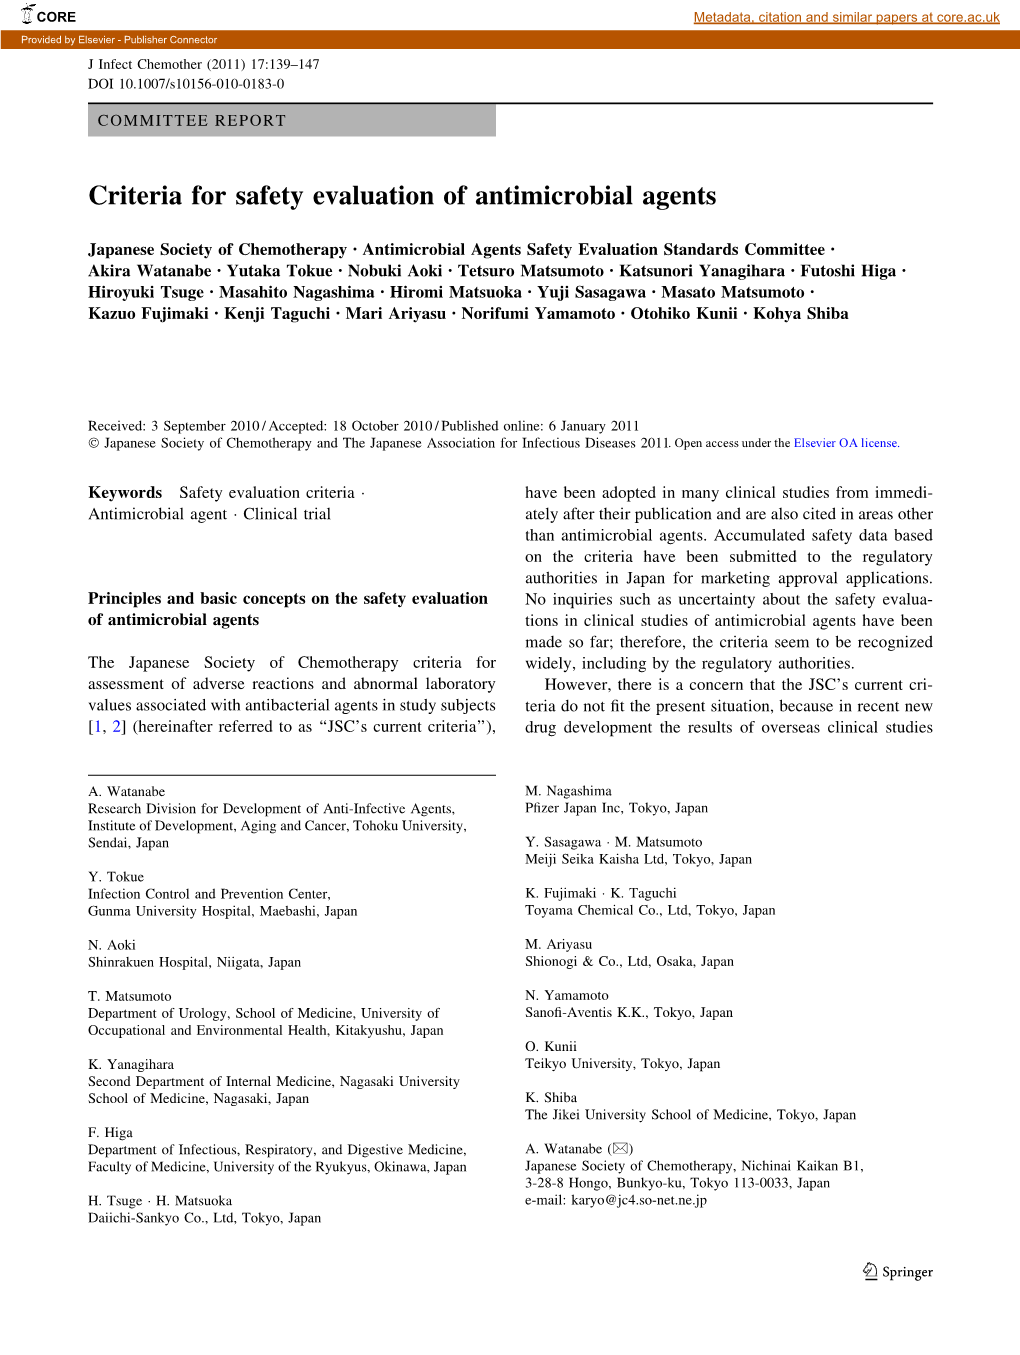 Criteria for Safety Evaluation of Antimicrobial Agents